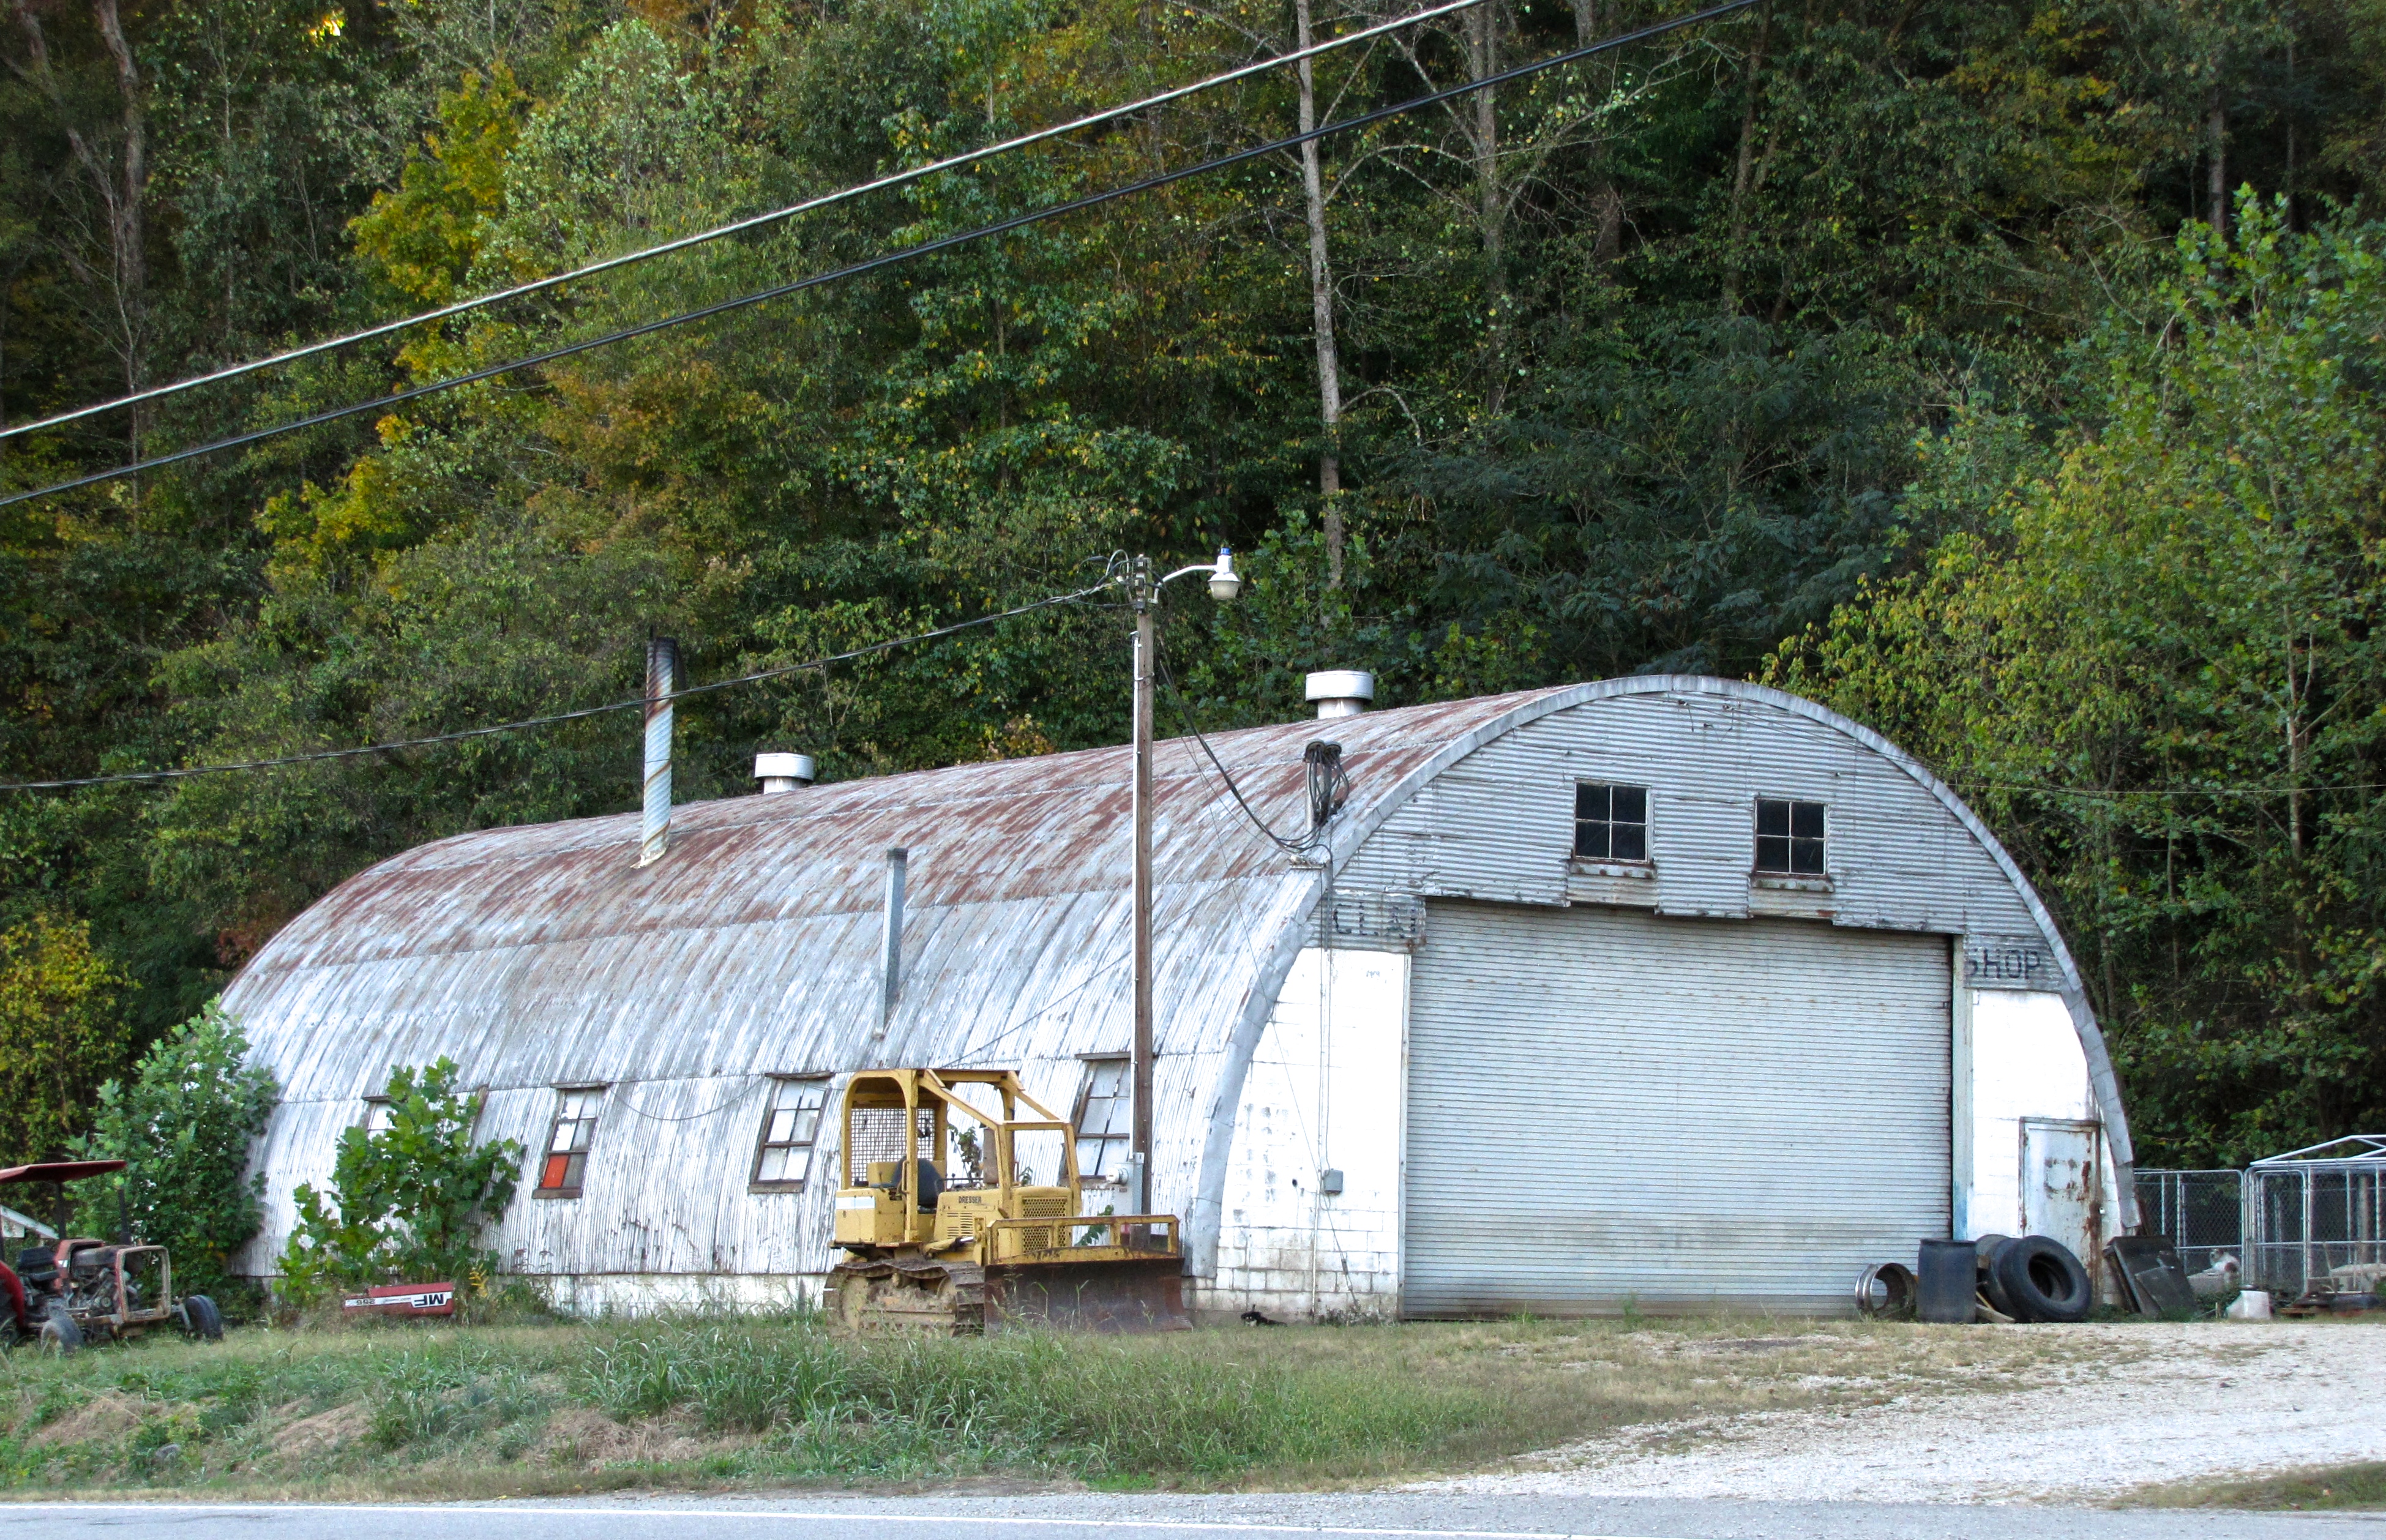 quonset hut in Carnegie, PA